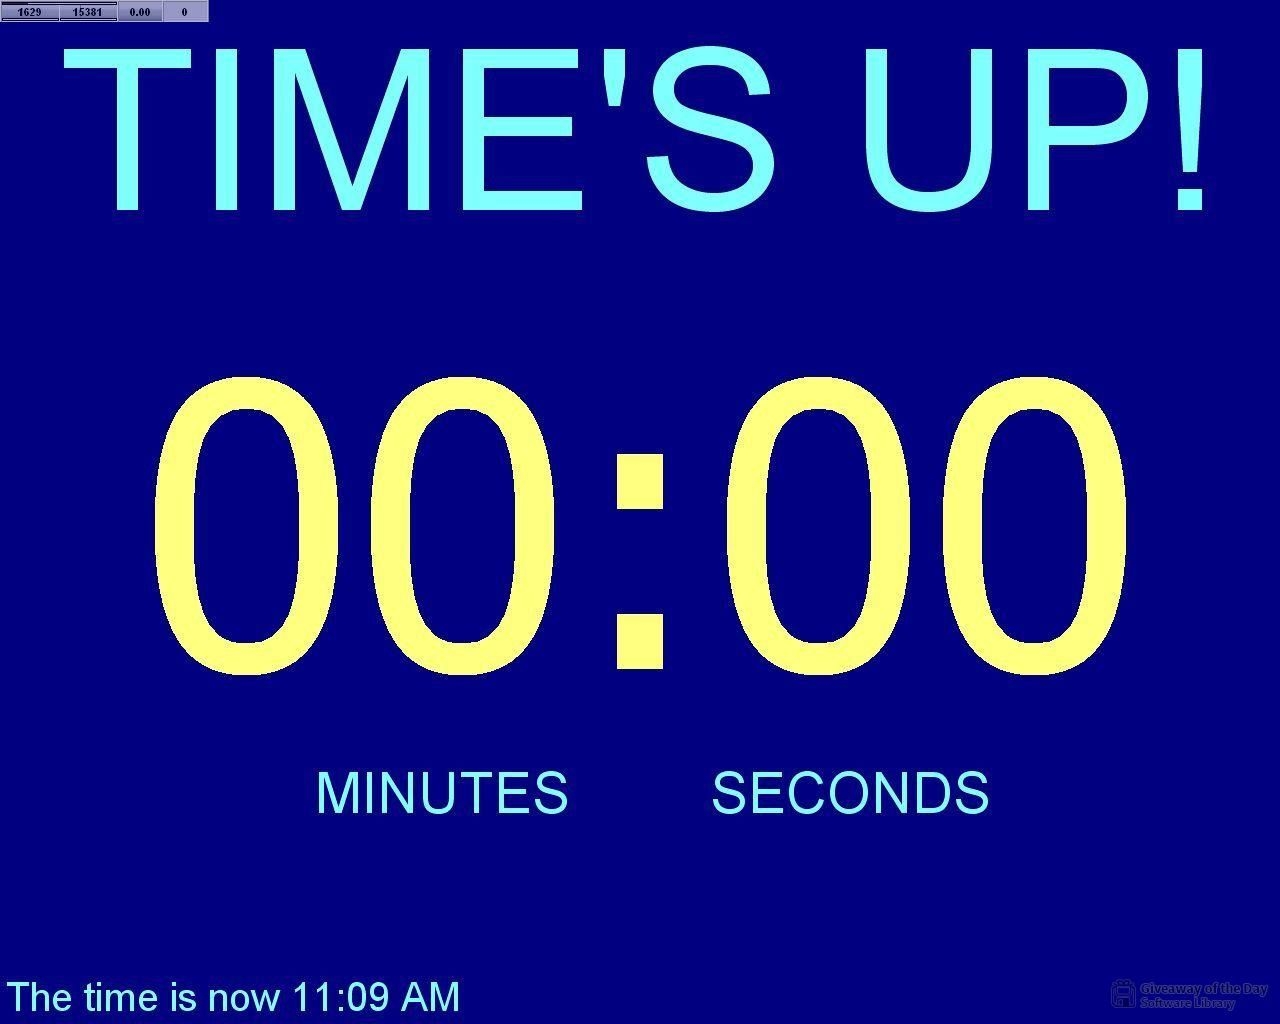 countdown timer clock for retirement